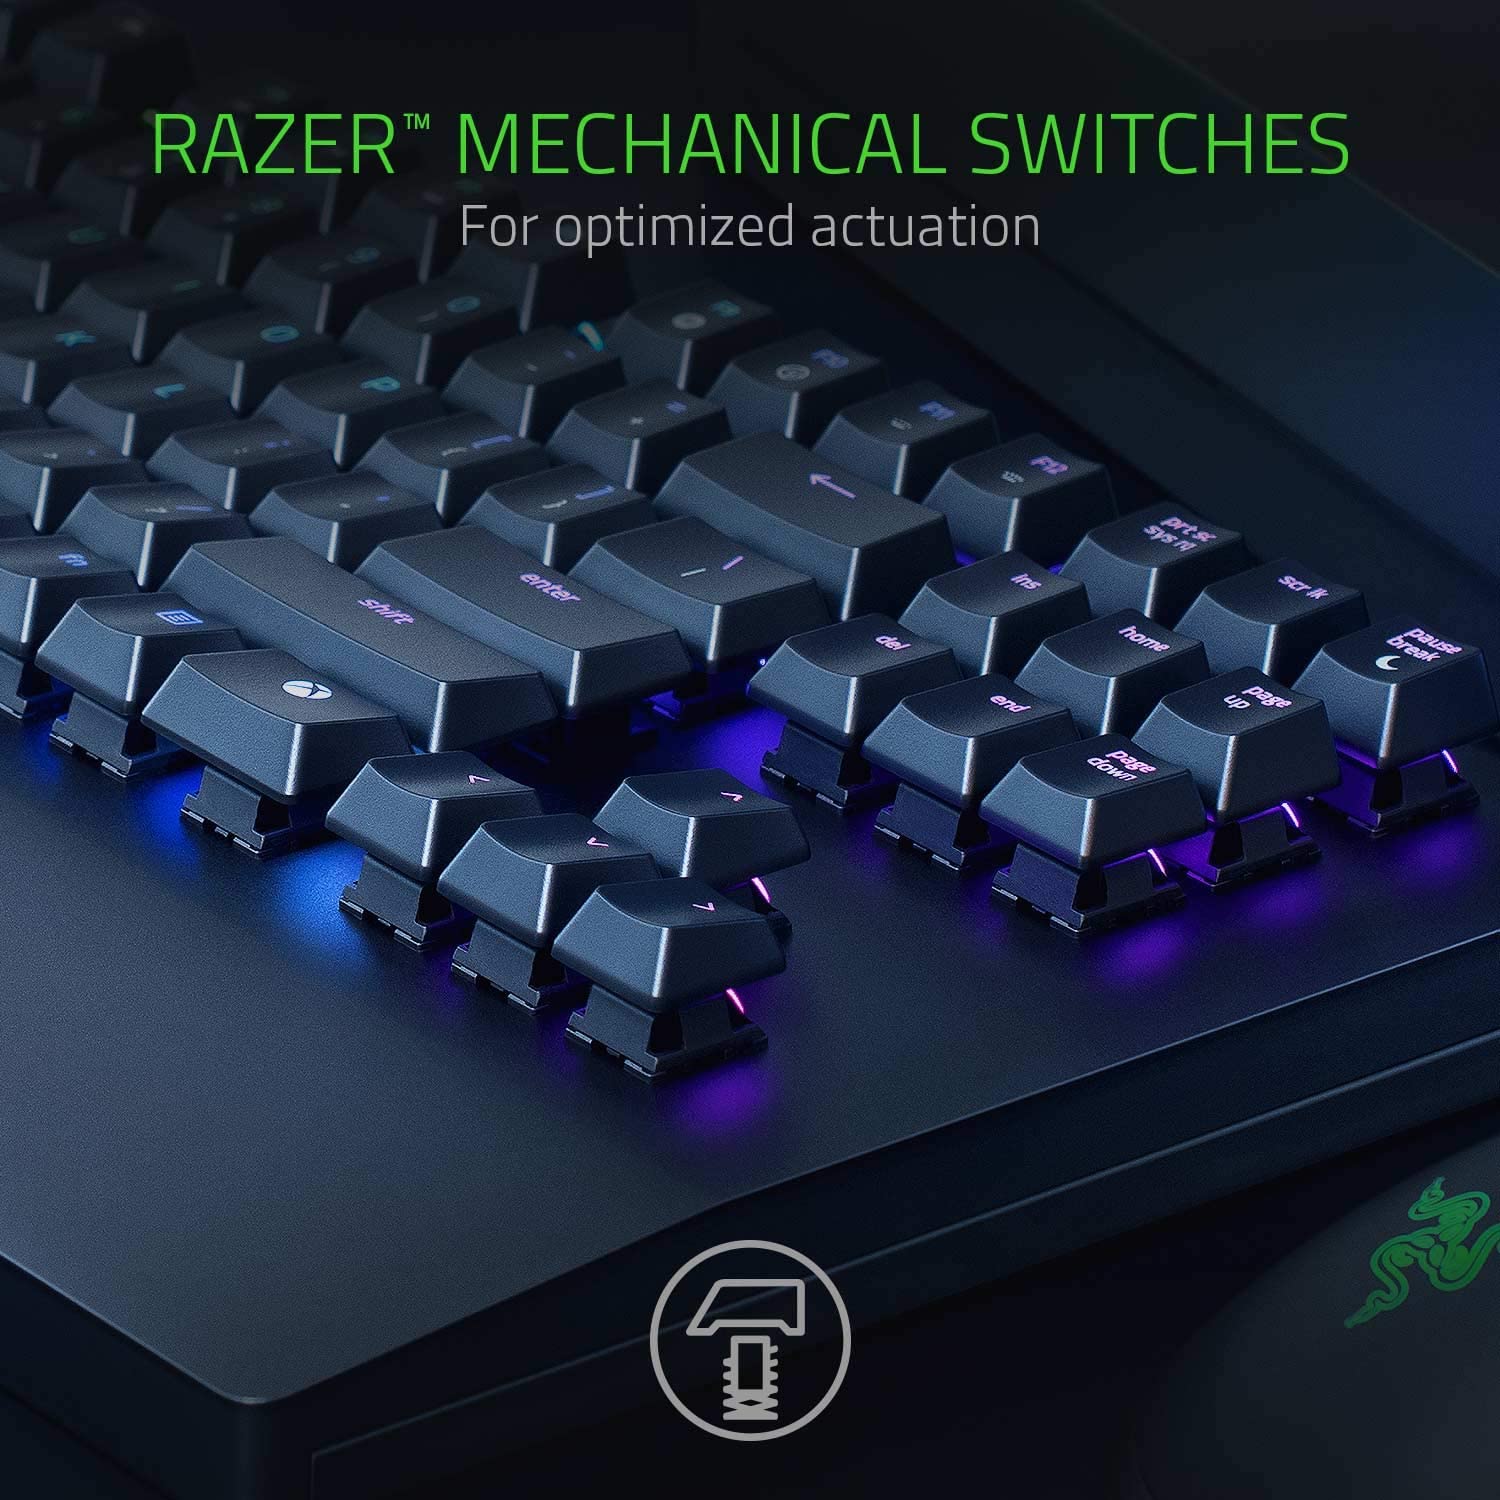 71G8 cfgf0L. AC SL1500 Razer Turret Wireless Mechanical Gaming Keyboard and Mouse Combo is now available at only 9.99 on Amazon Prime Day